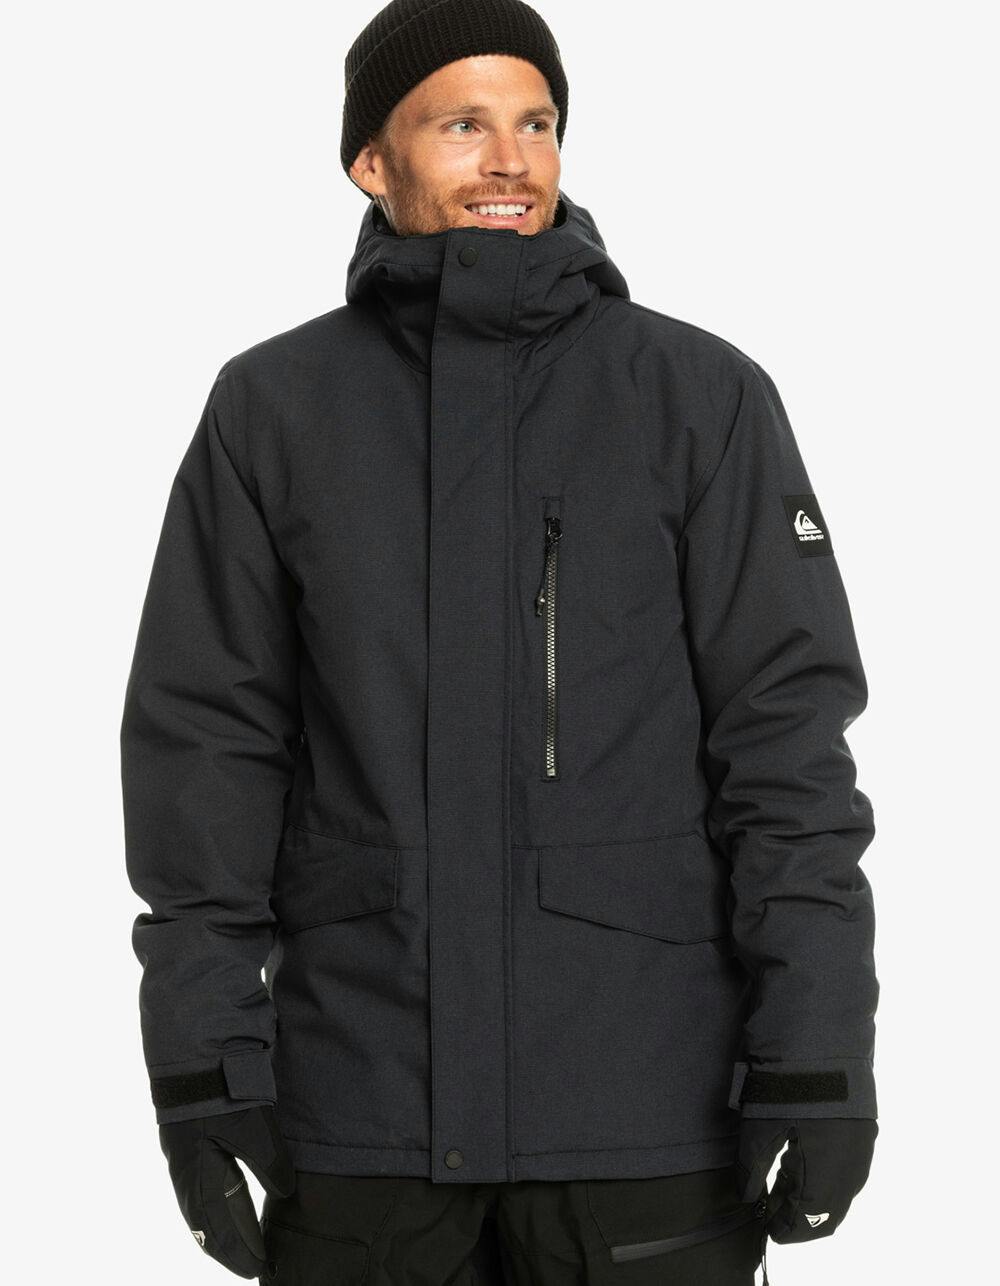 Quiksilver Men's Mission Solid Insulated Jacket